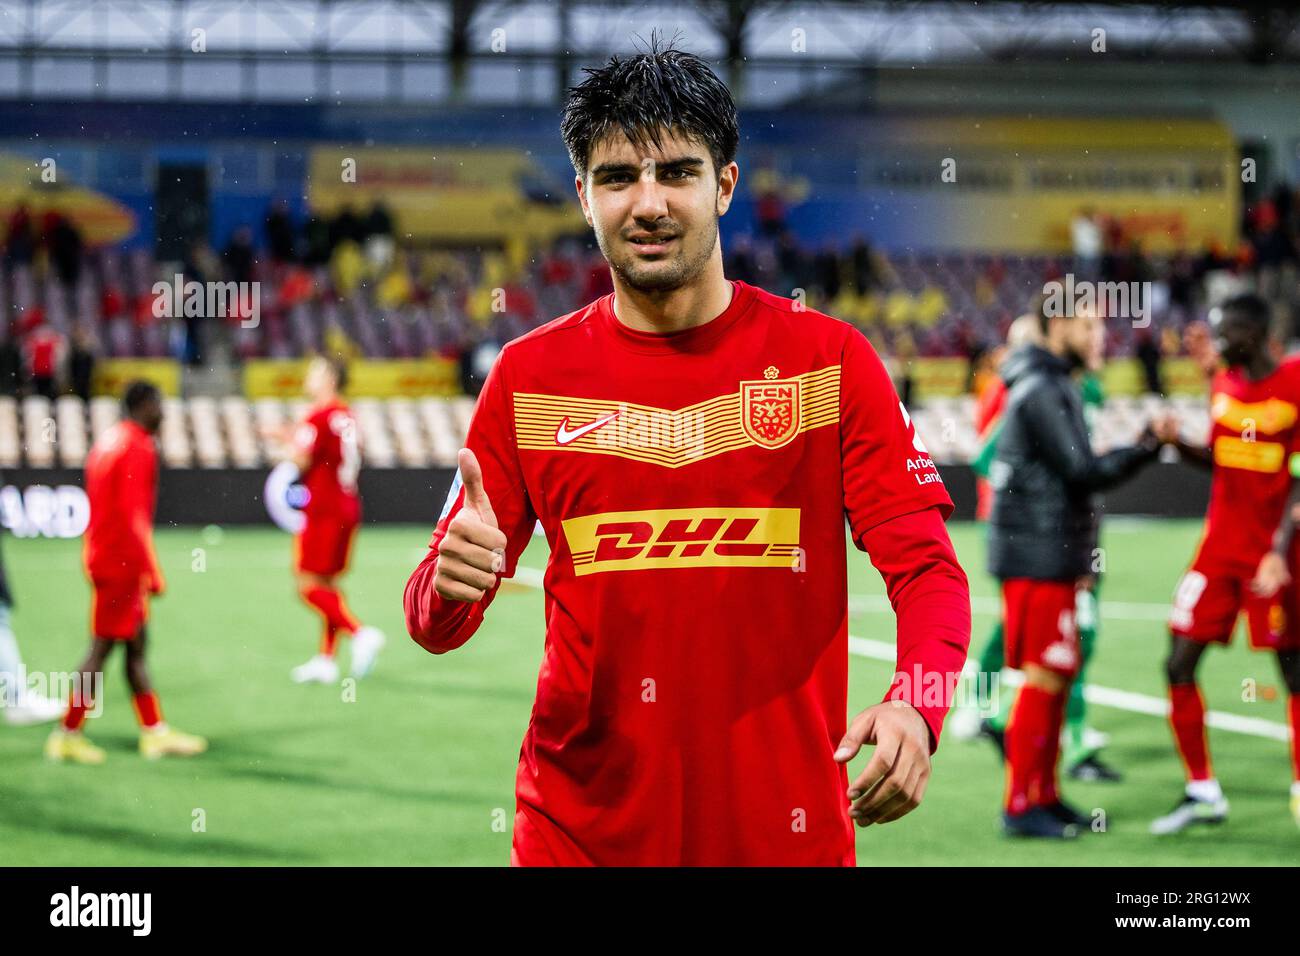 Farum, Denmark. 06th Aug, 2023. Zidan Sertdemir (21) of FC Nordsjaelland seen after the 3F Superliga match between FC Nordsjaelland and Broendby IF at Right to Dream Park in Farum. (Photo Credit: Gonzales Photo/Alamy Live News Stock Photo